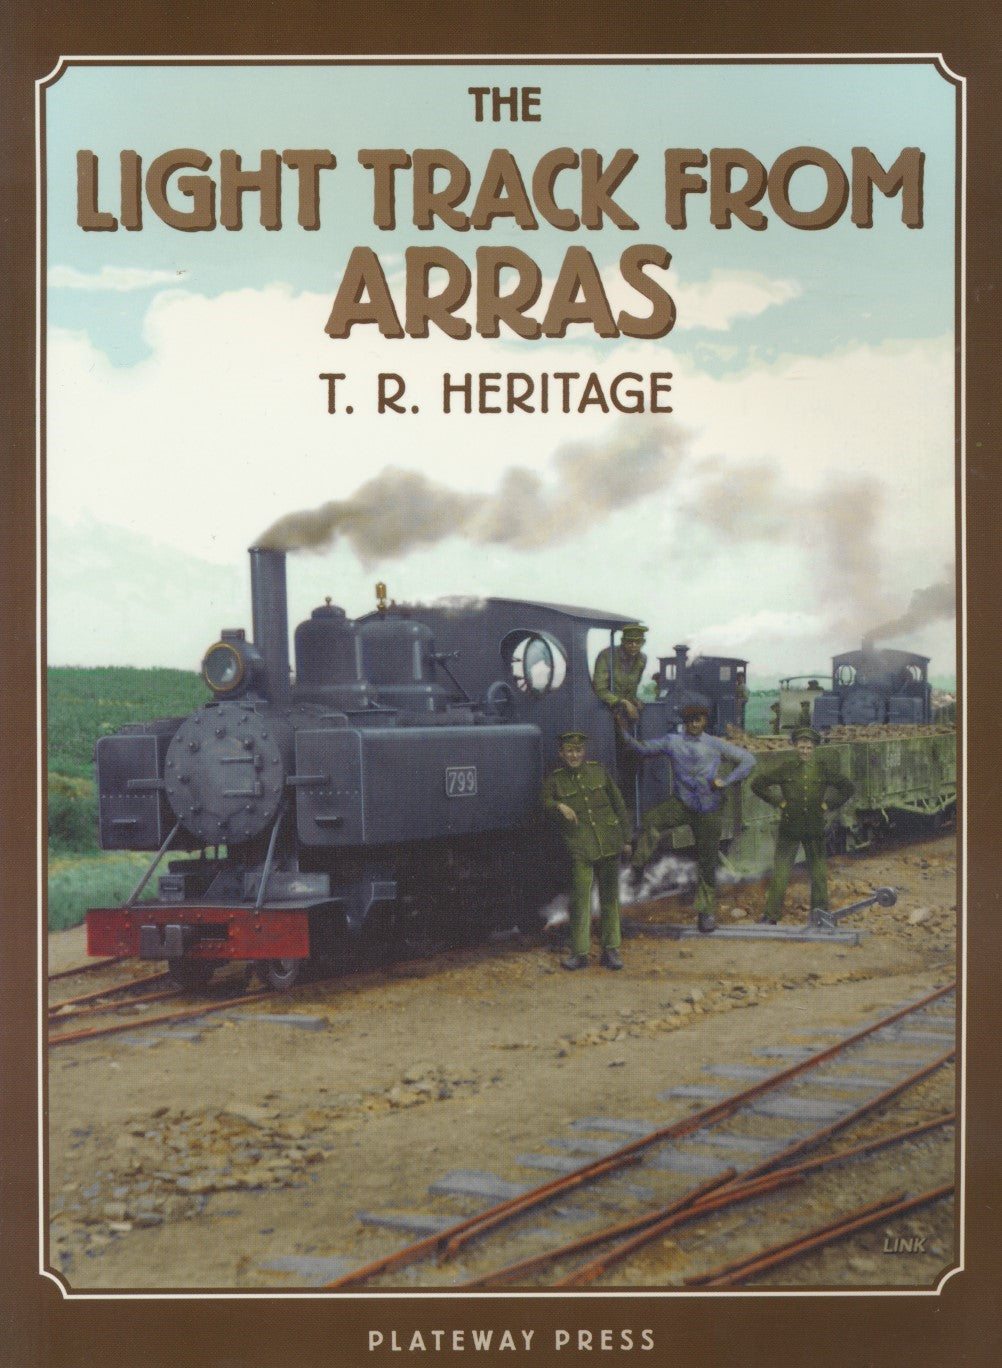 The Light Track from Arras